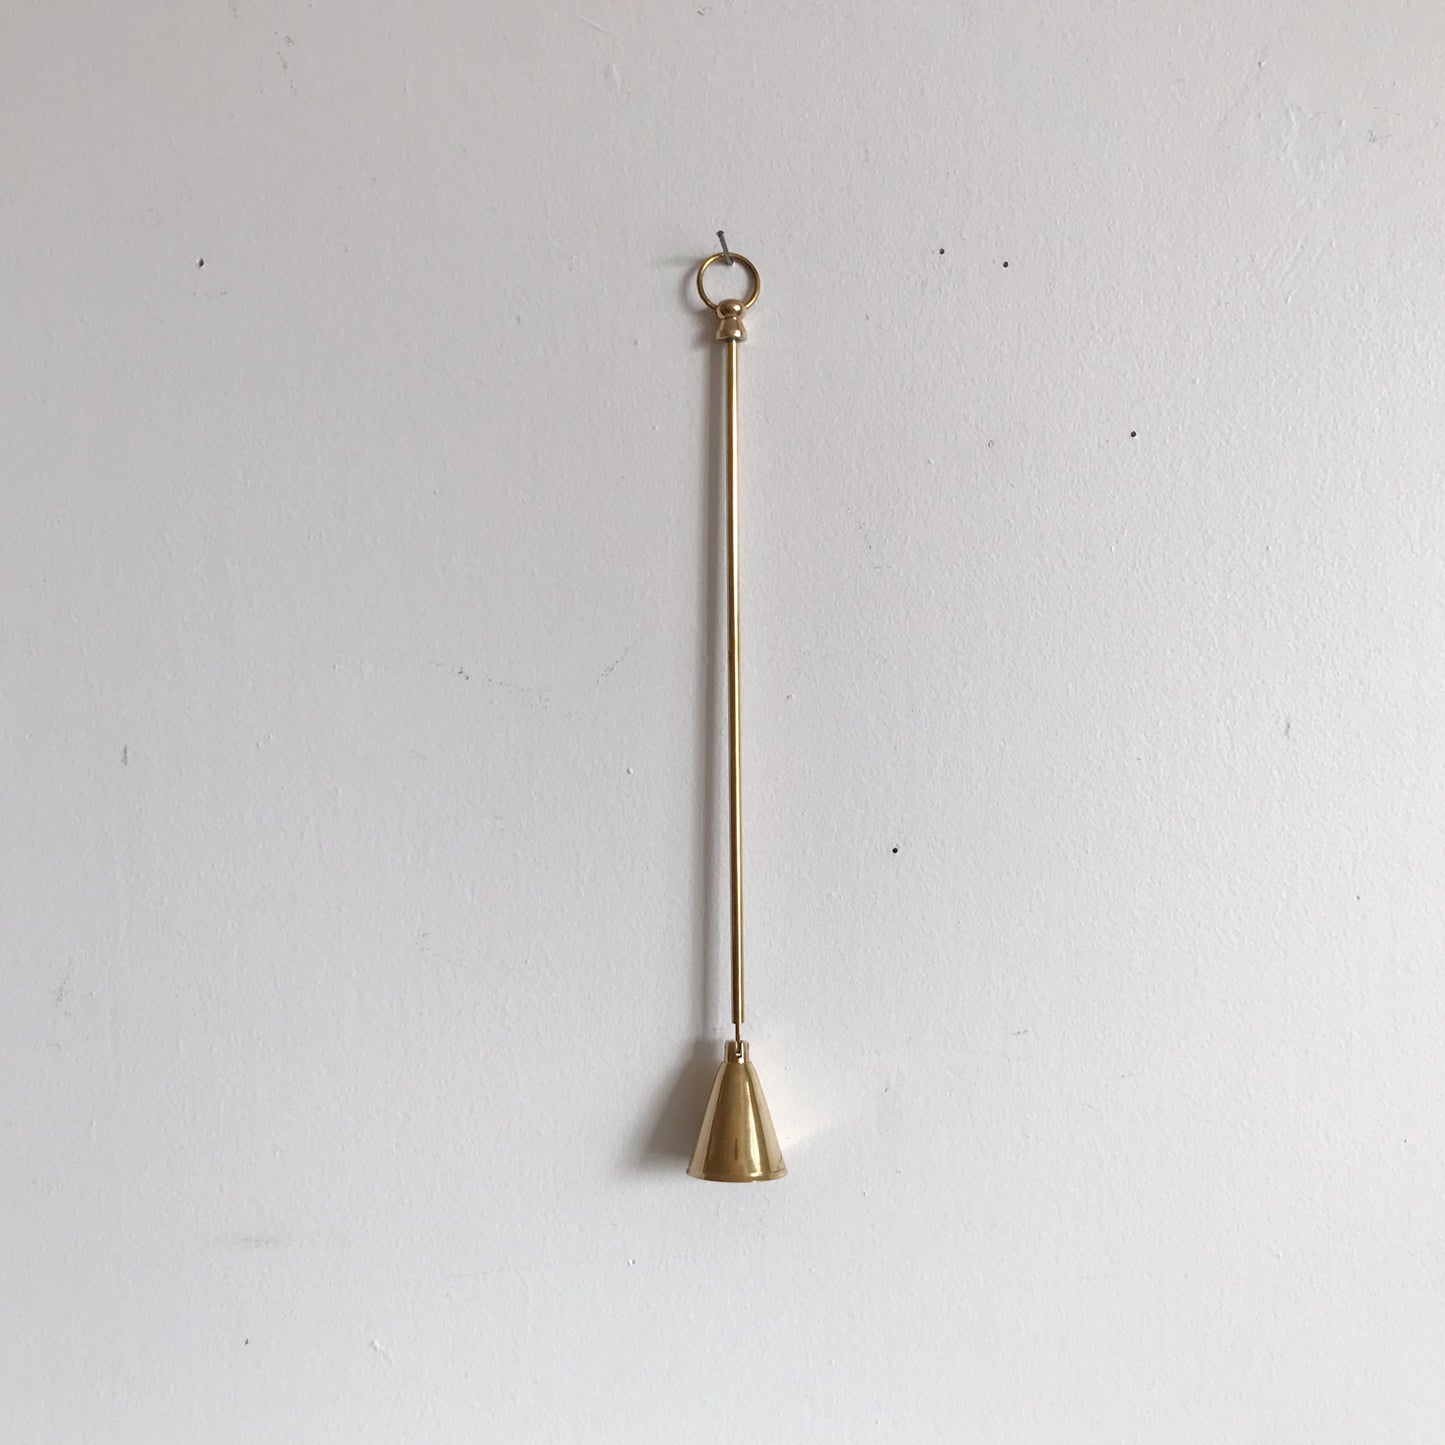 Simple Vintage Brass Candle Snuffer